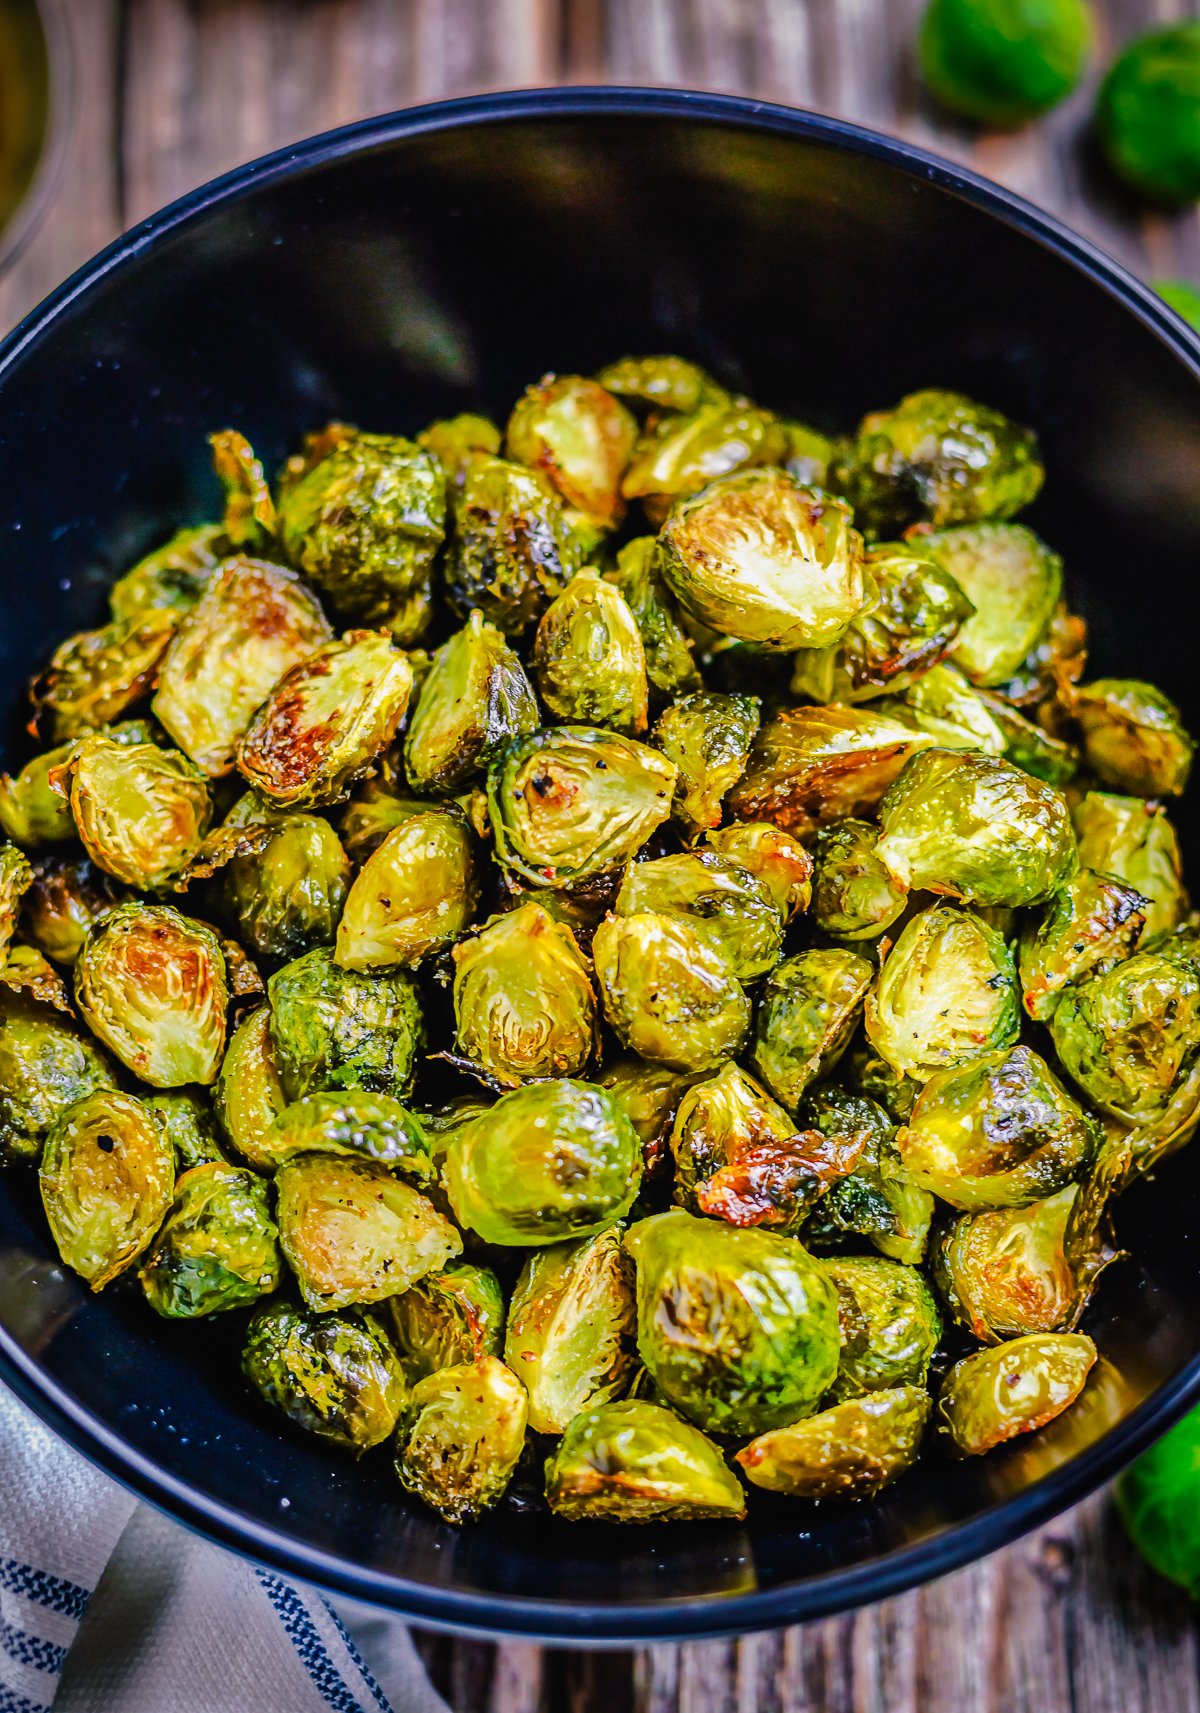 Bowl full of Brussel Sprout Recipe.